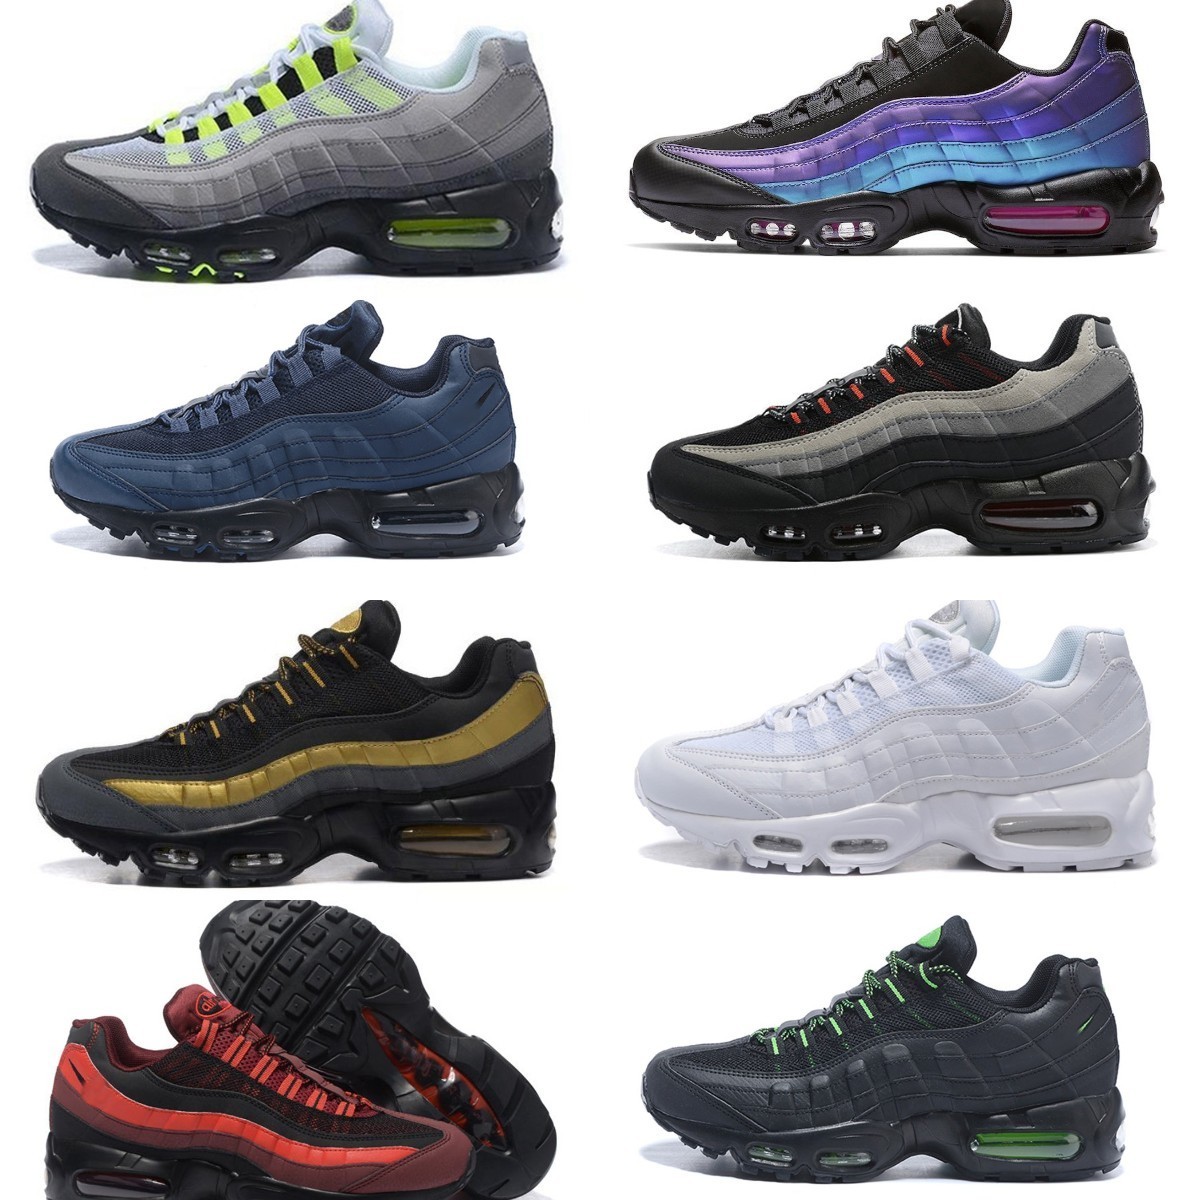 

2022 Designer Mens 95 Running Shoes Yin Yang OG Airs Solar Triple Black White 95s Worldwide Seahawks Particle Grey Neon Laser Fuchsia Red Greedy 3.0 Sports Sneakers S8, Please contact us